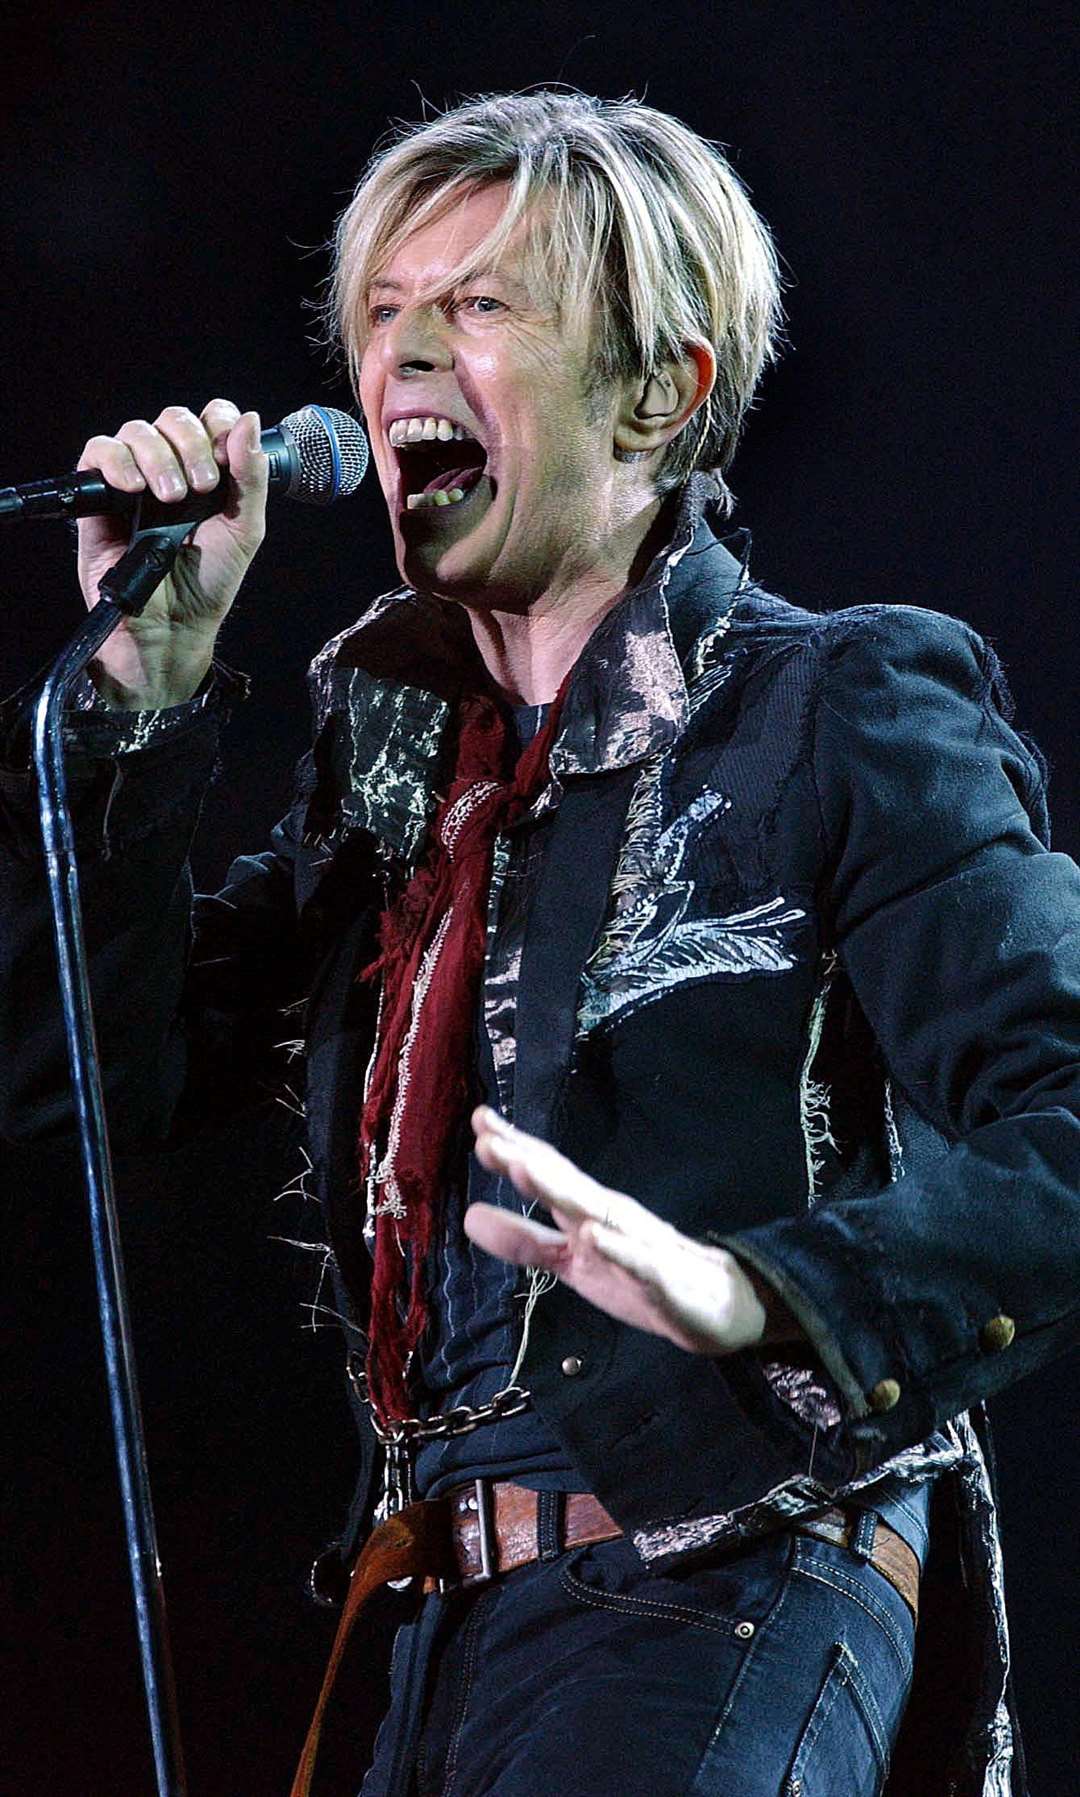 Singer David Bowie. (Andy Butterton/PA)